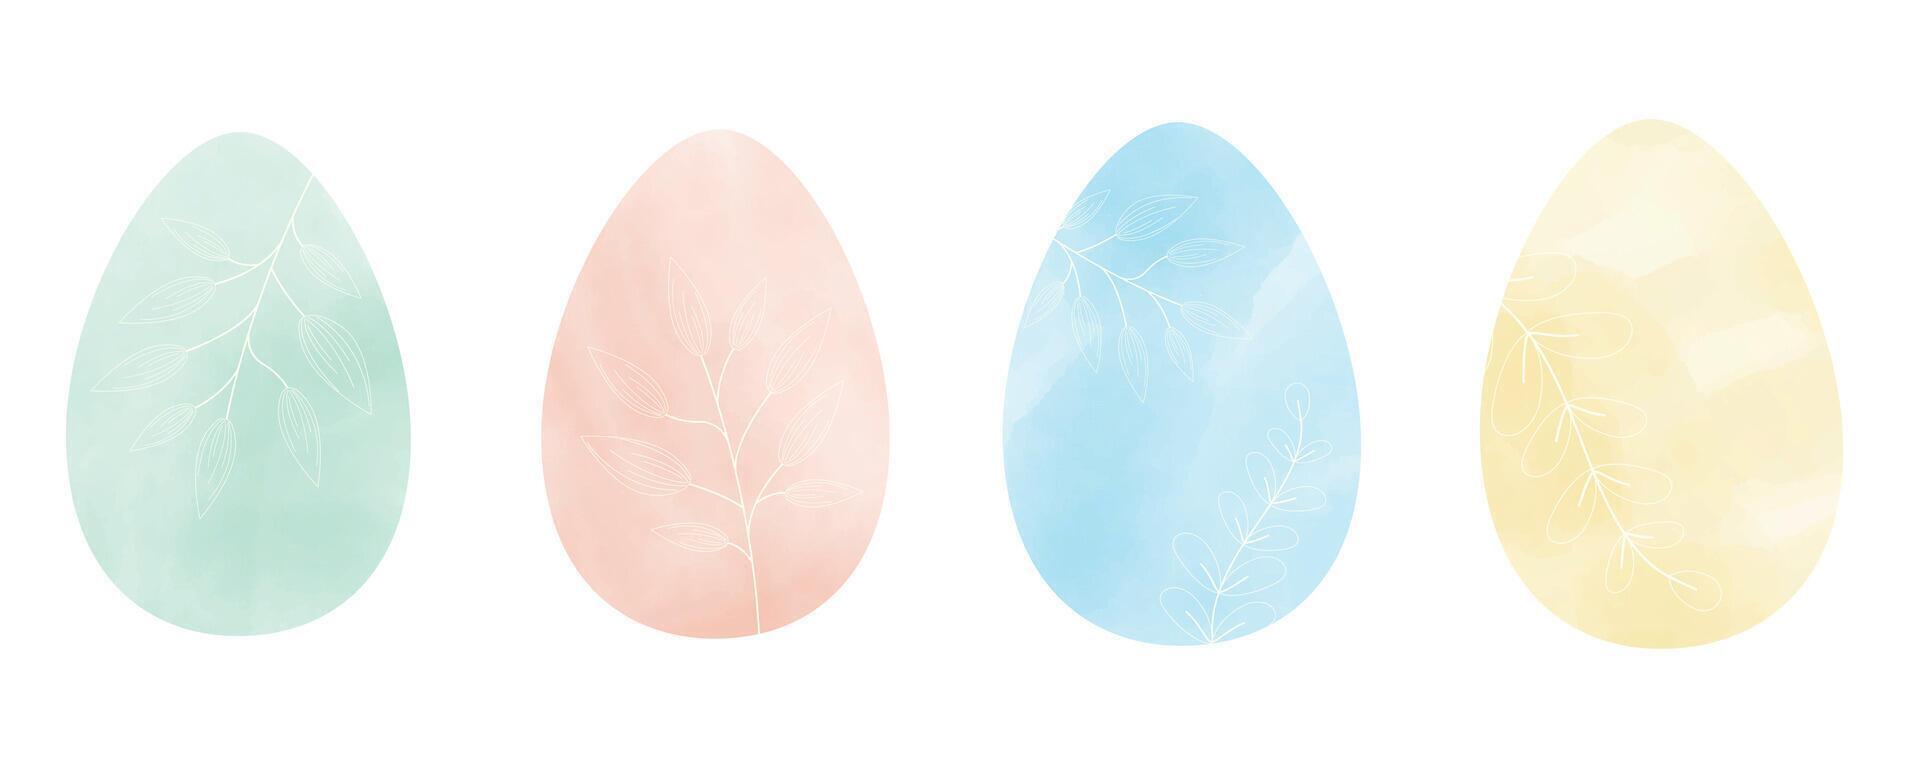 Watercolor easter eggs silhouette with white elements collection. Set of illustration isolated on white background, template for poster, icon, card, logo, label. vector